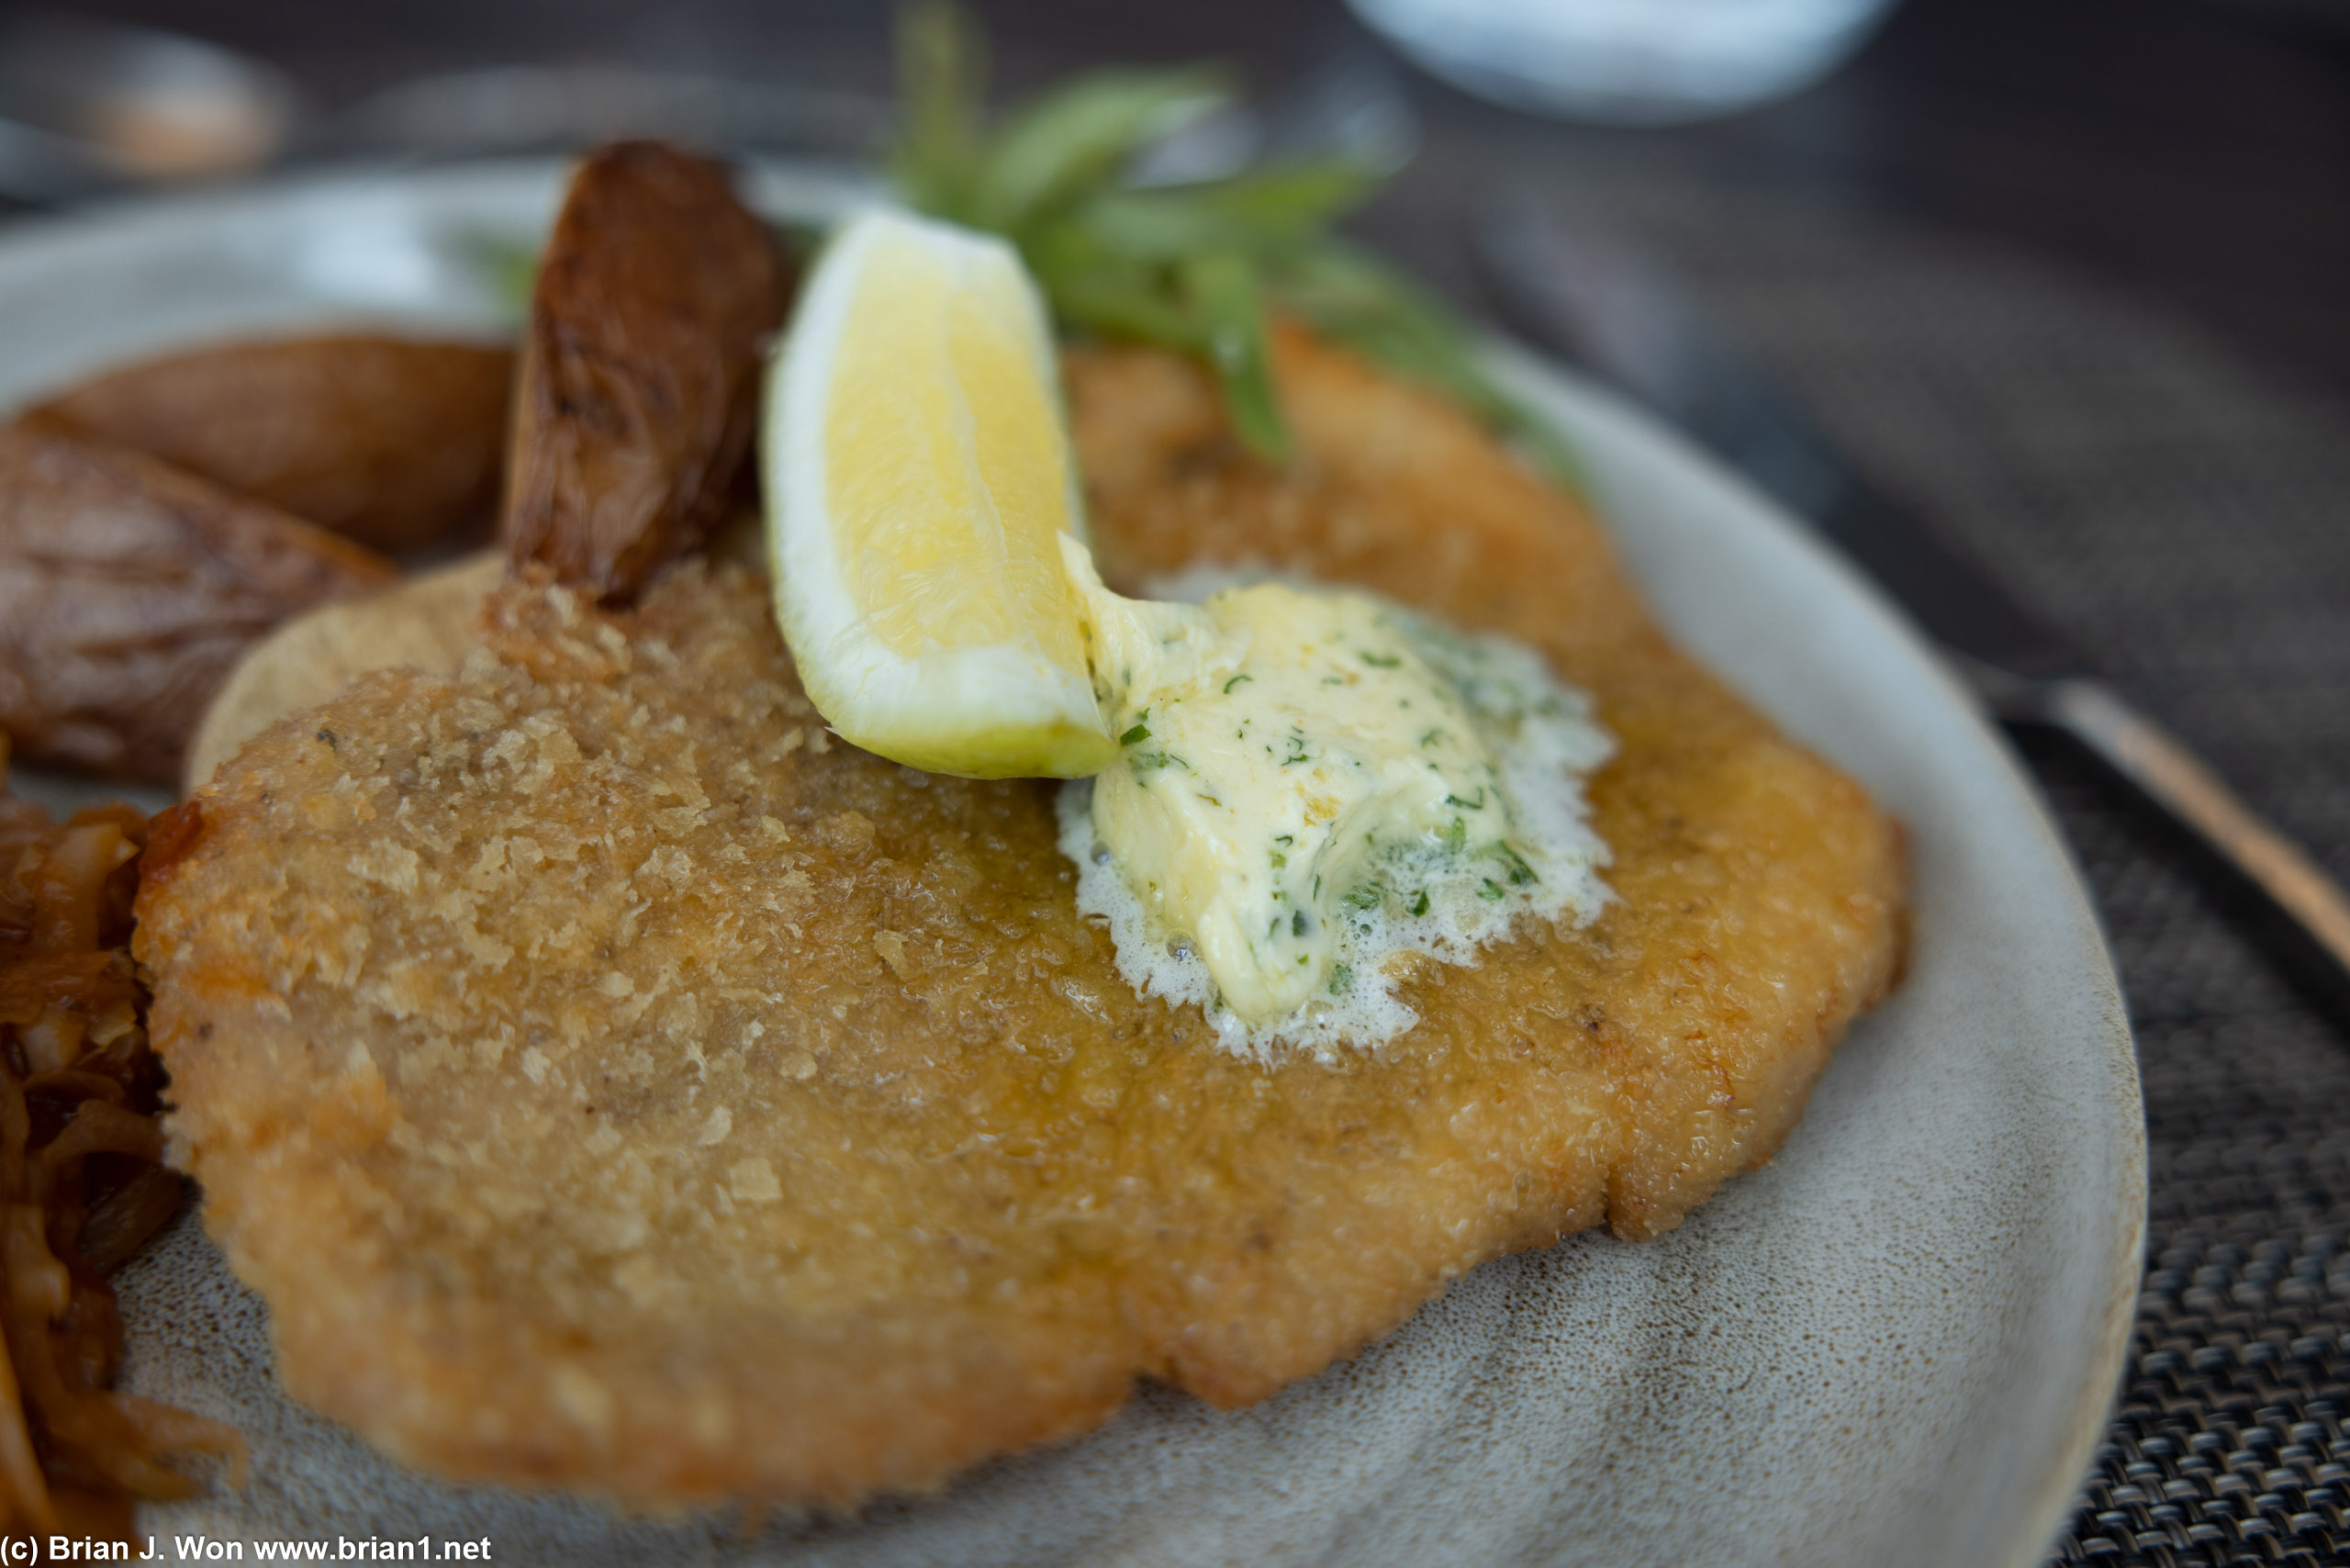 Schnitzel for lunch at C.Green's on deck 8.